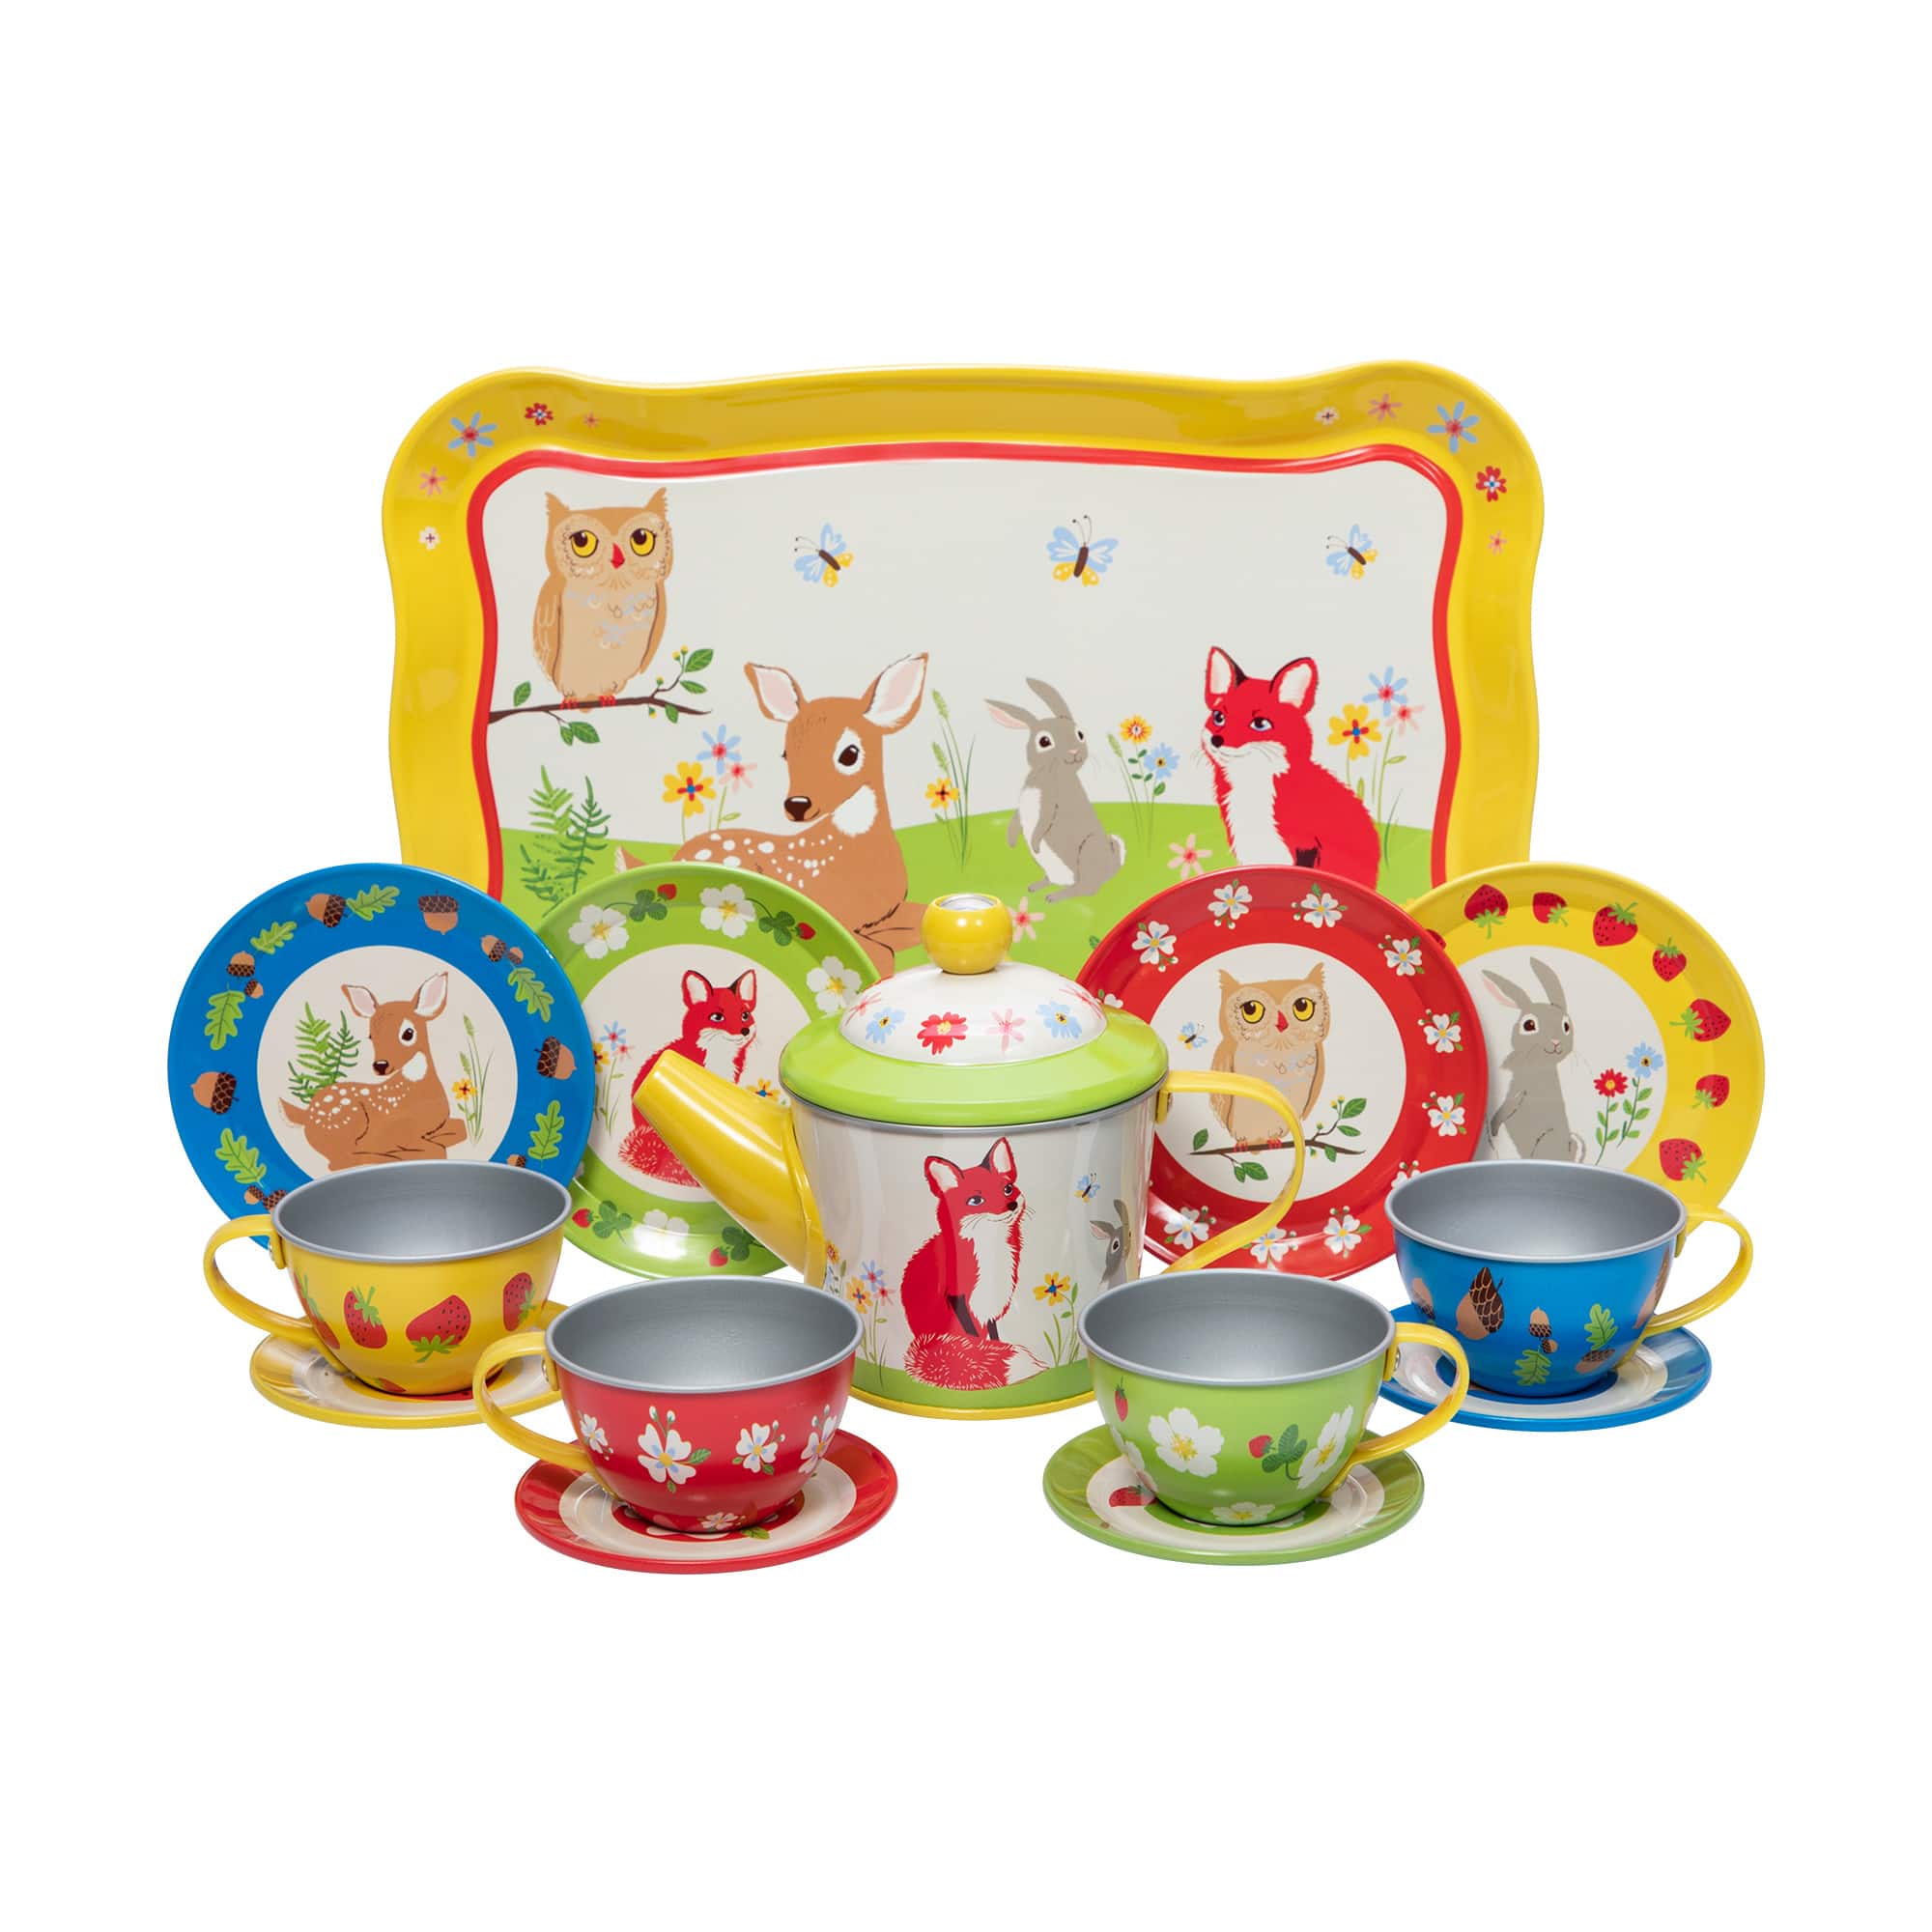 FOREST FRIENDS TEA TIME SET FFTTS TOYS DISHES CUPS KIDS ANIMALS FOX RABBIT OWL 